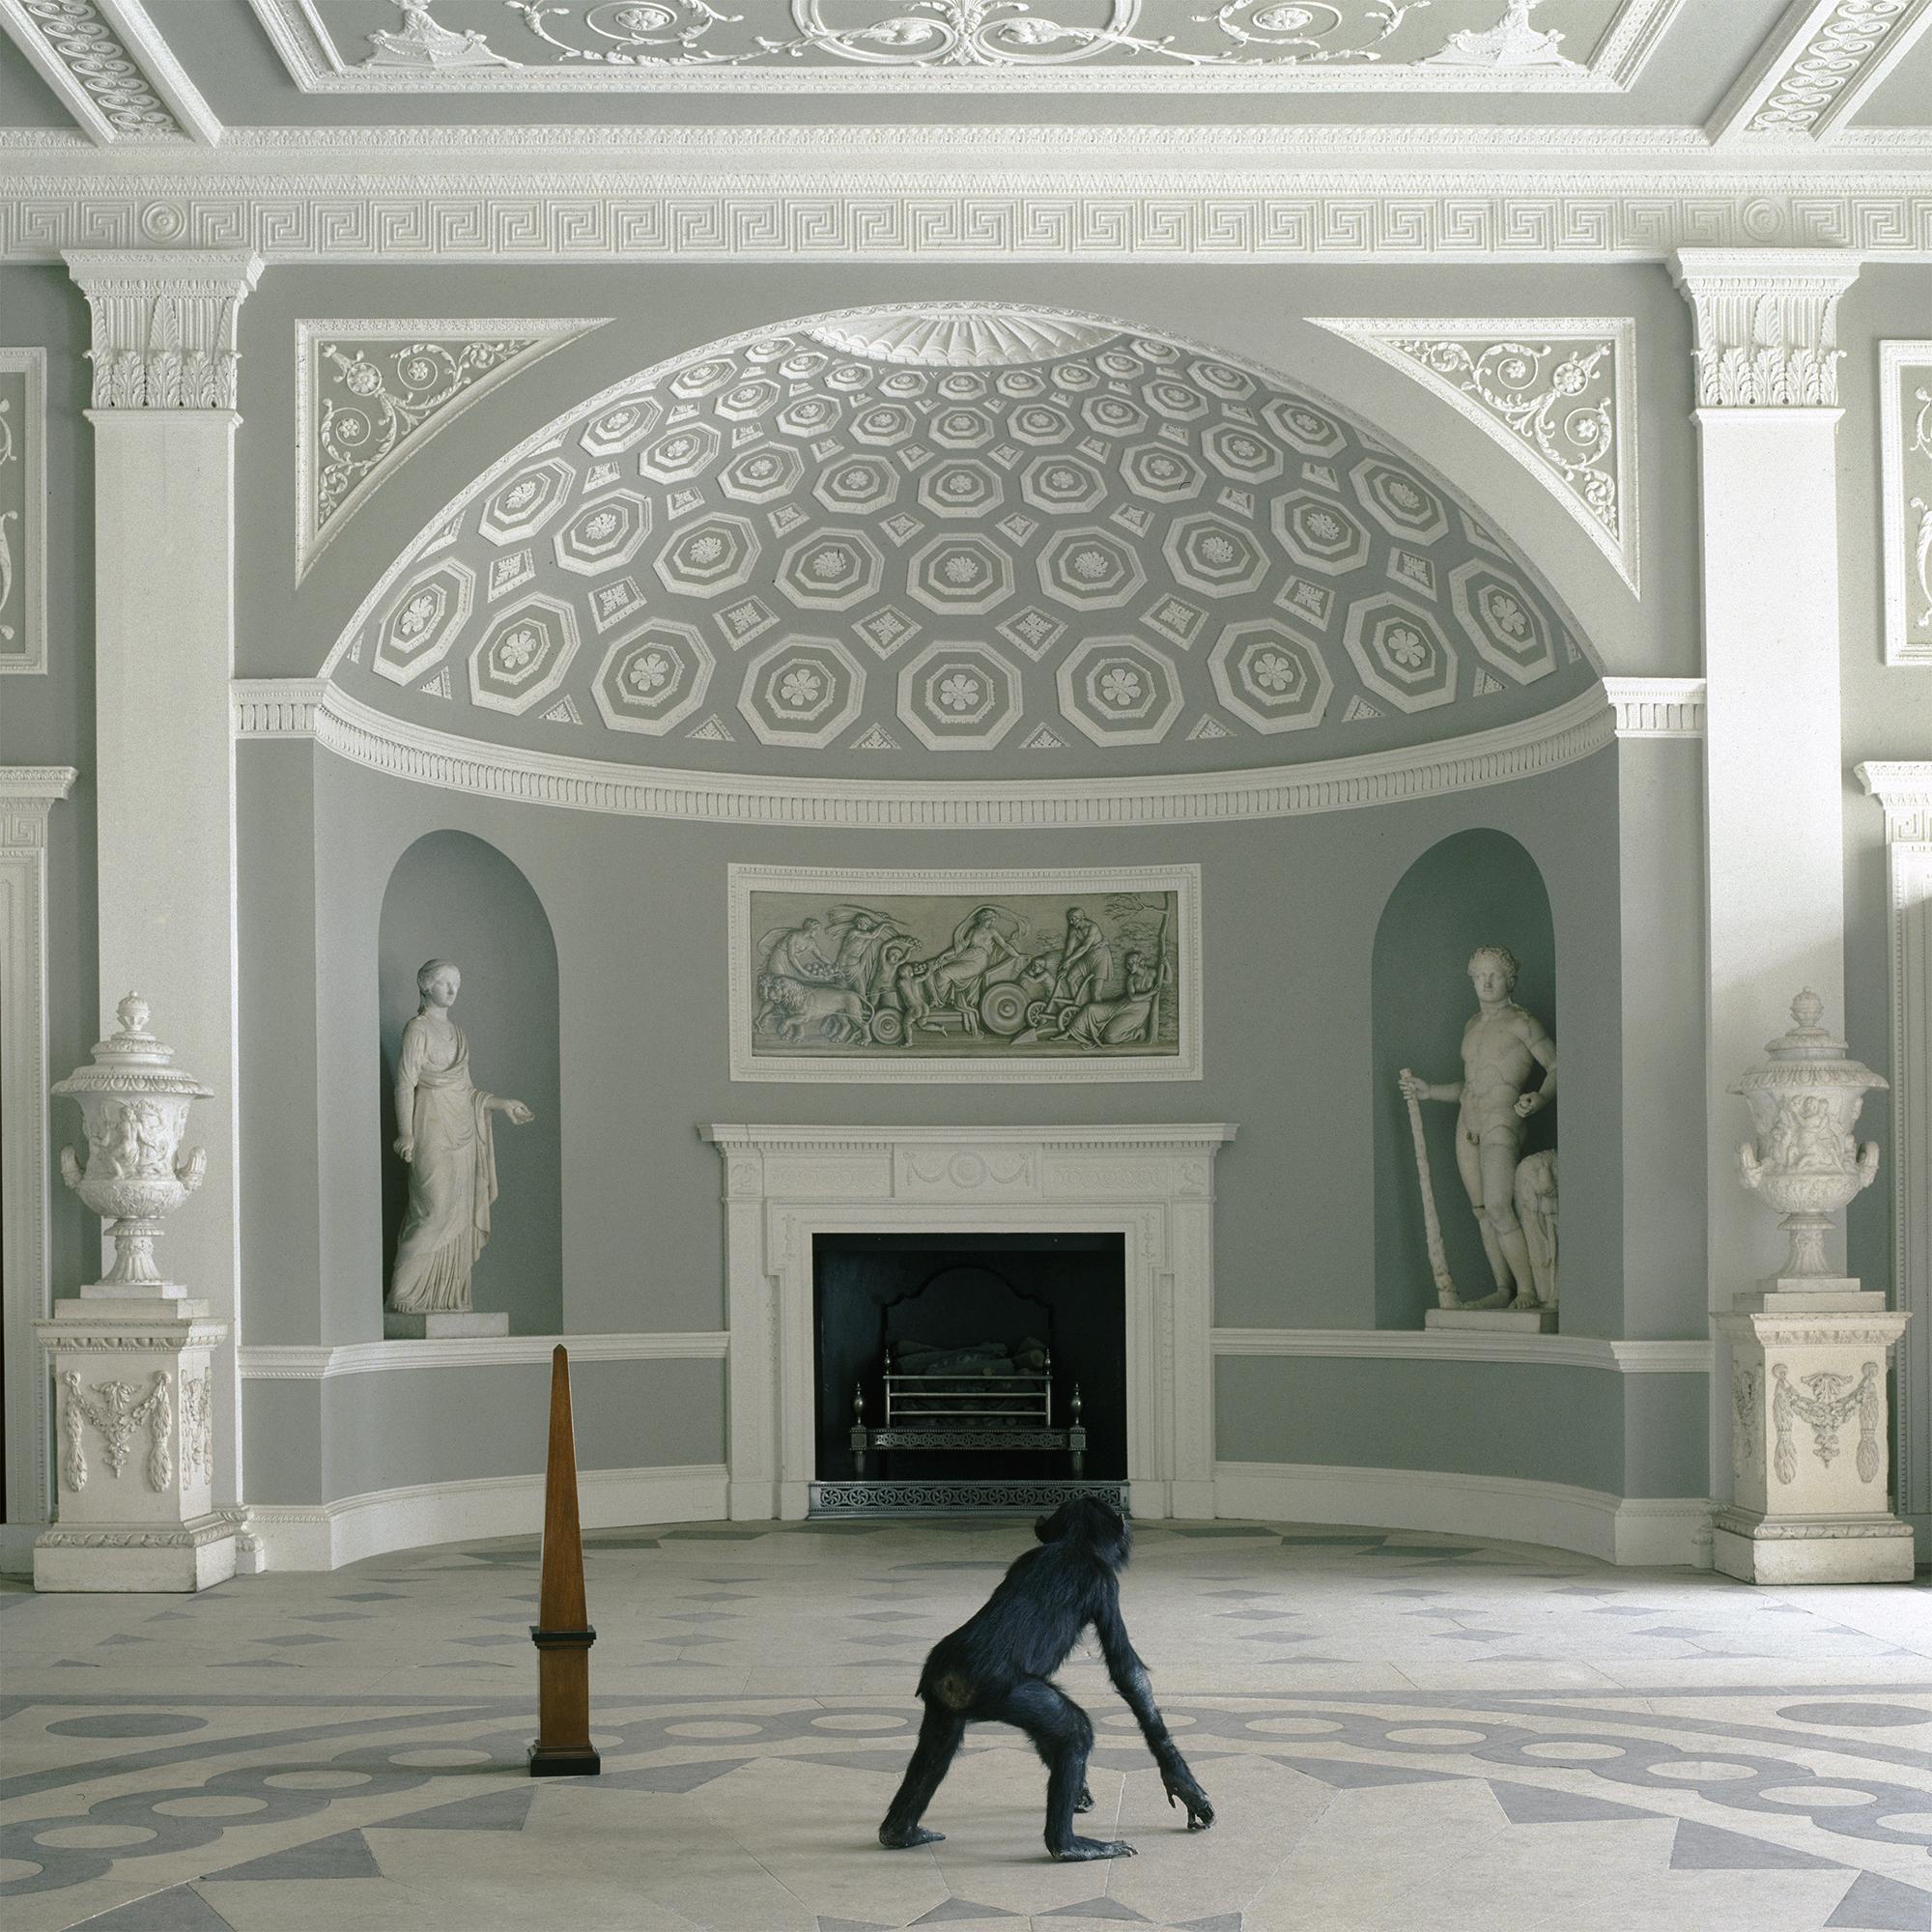 Karen Knorr Color Photograph - The Genius of the Place (1)